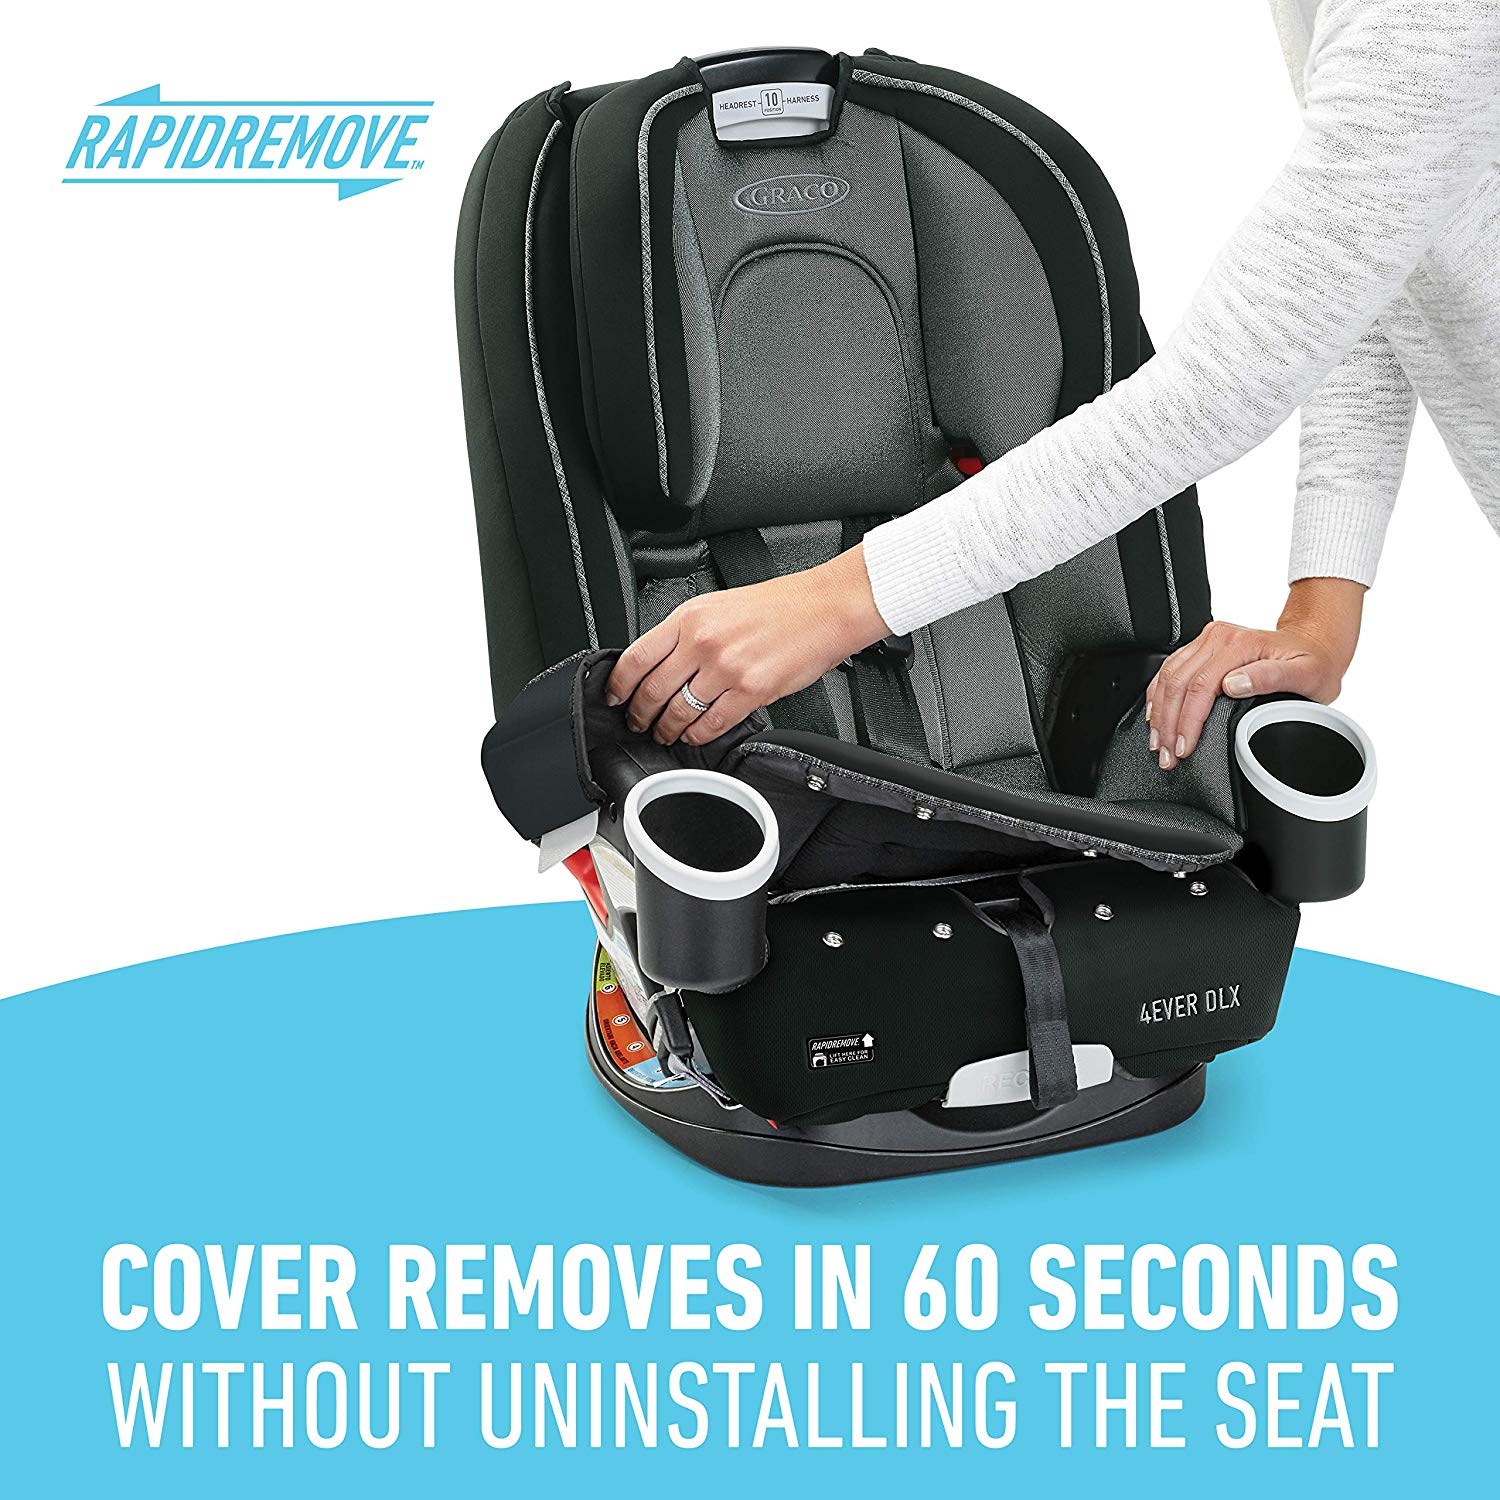 Graco 4Ever DLX Platinum All-in-1 Car Seat Review: Love It 4Ever and